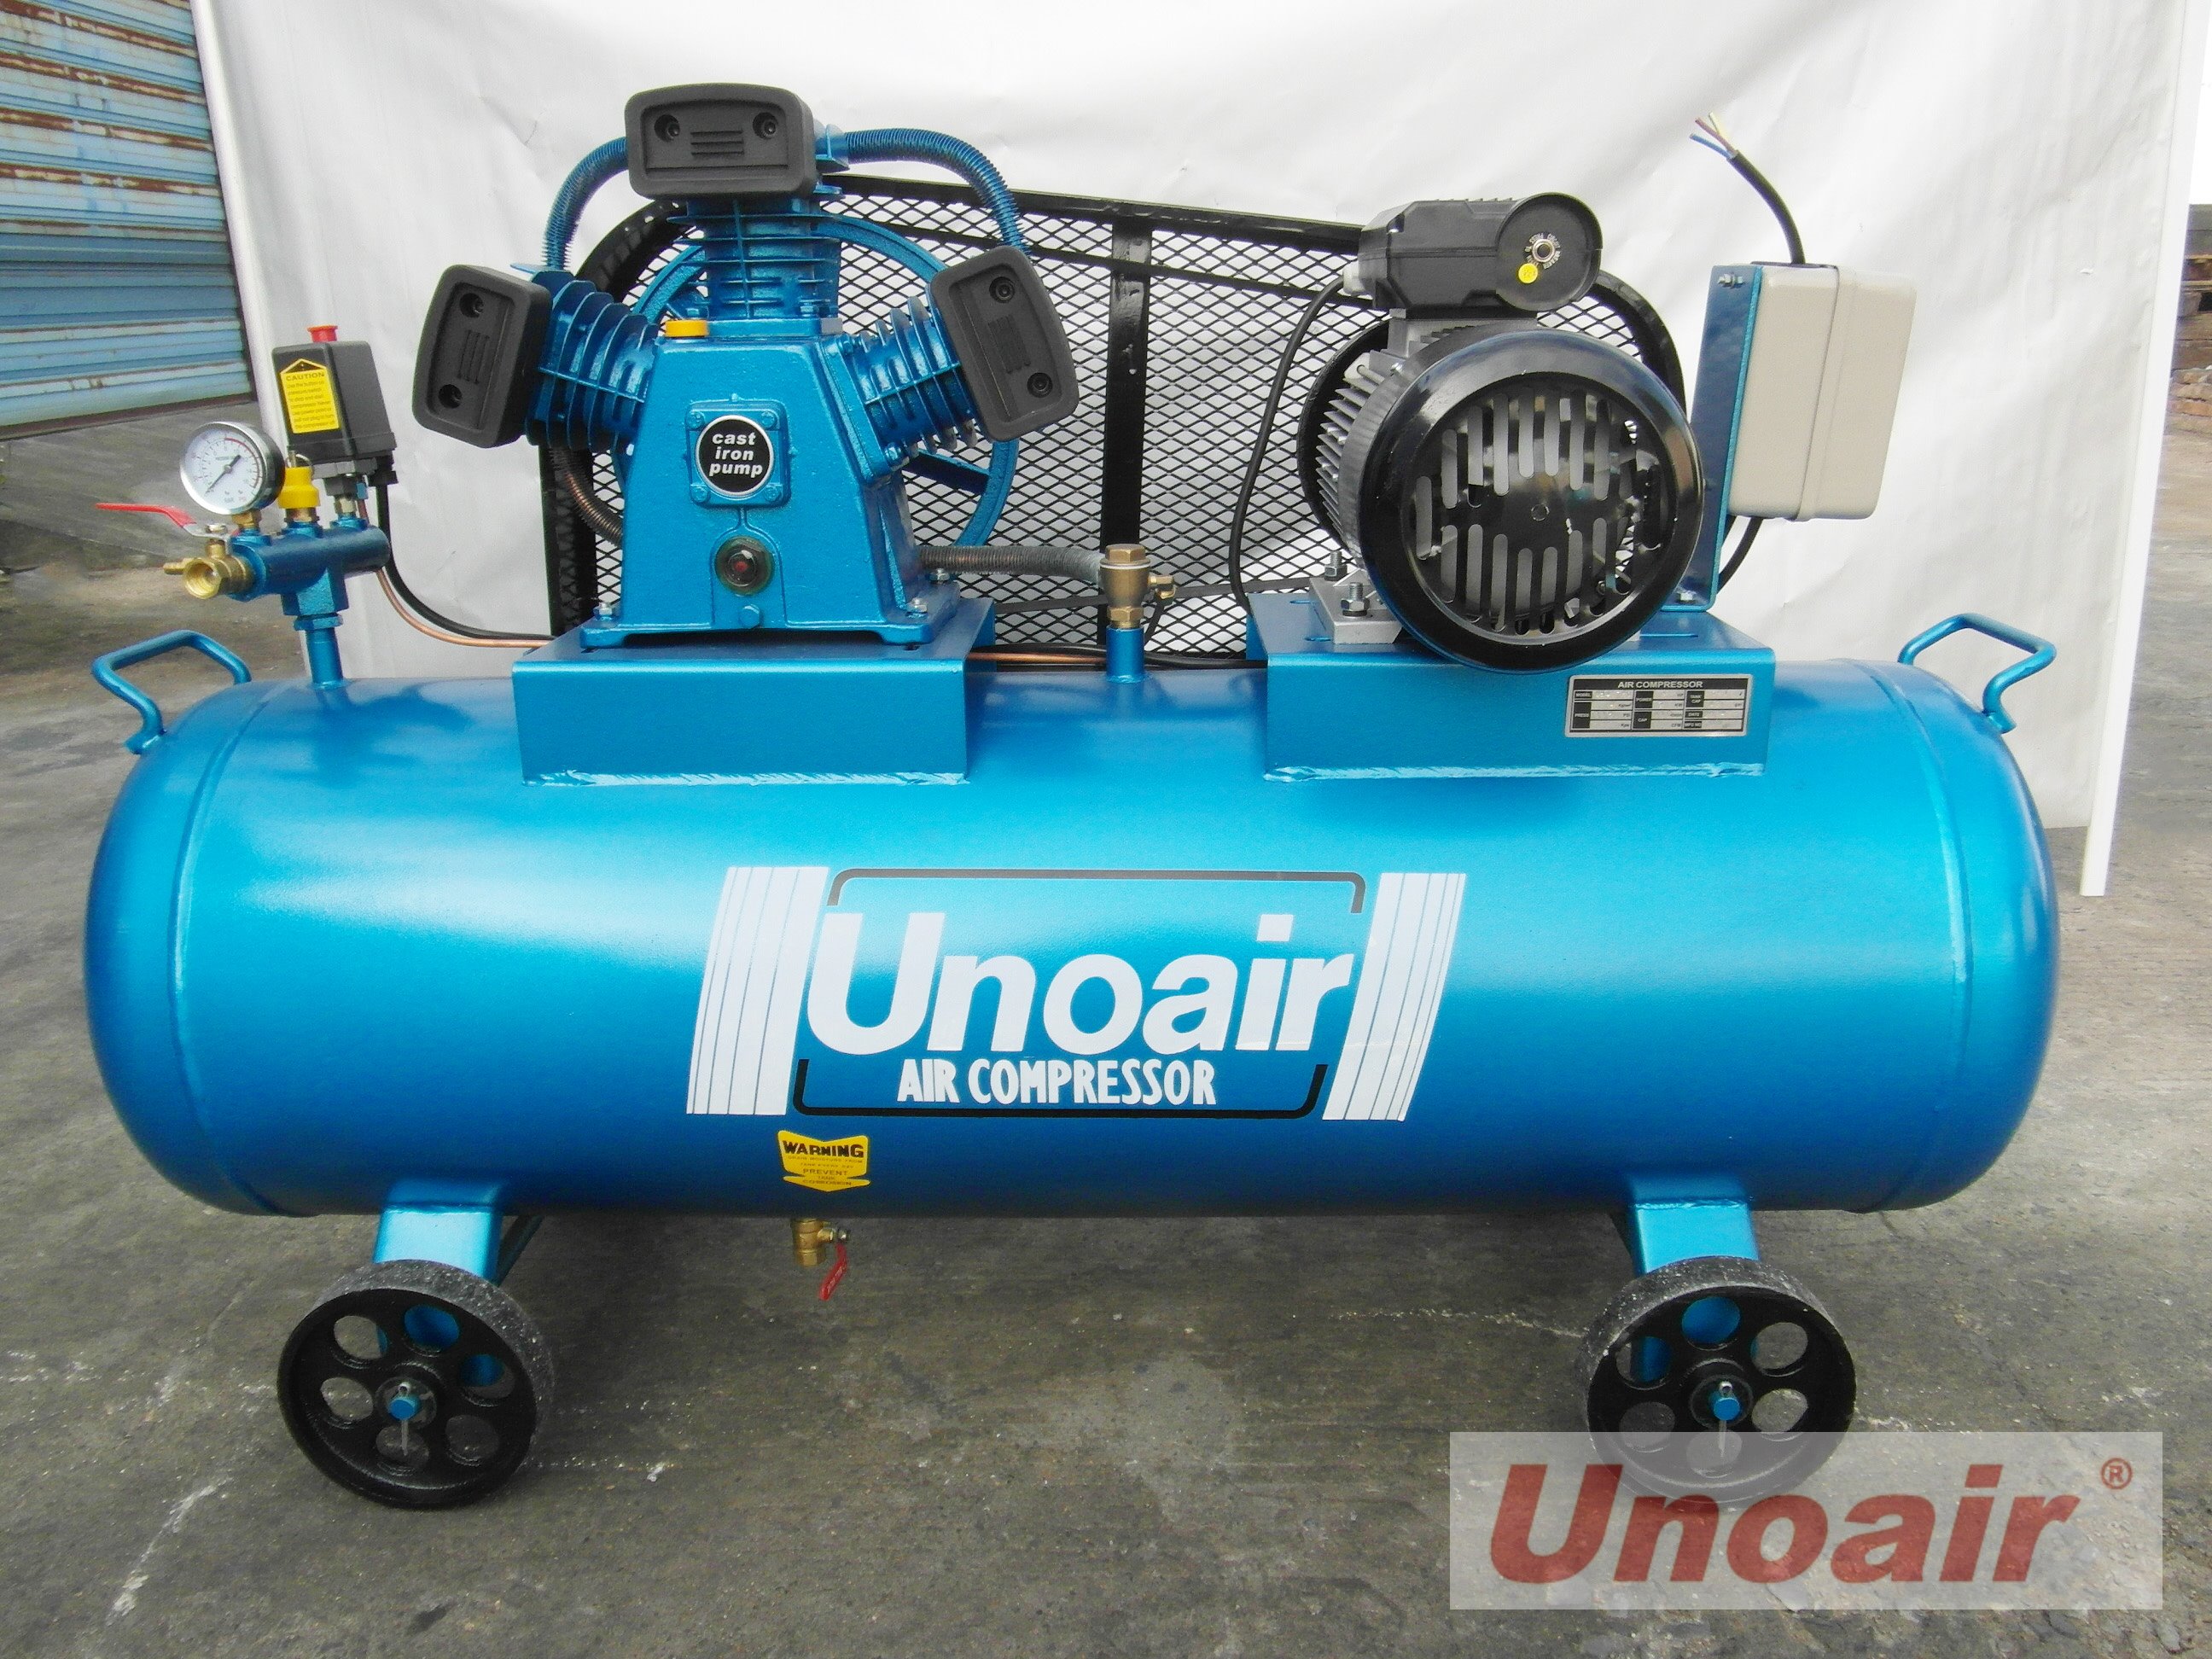 UNOAIR Weekly Update 12/02/2022 UNOAIR 4HP AIR COMPRESSORS AVAILABLE NOW